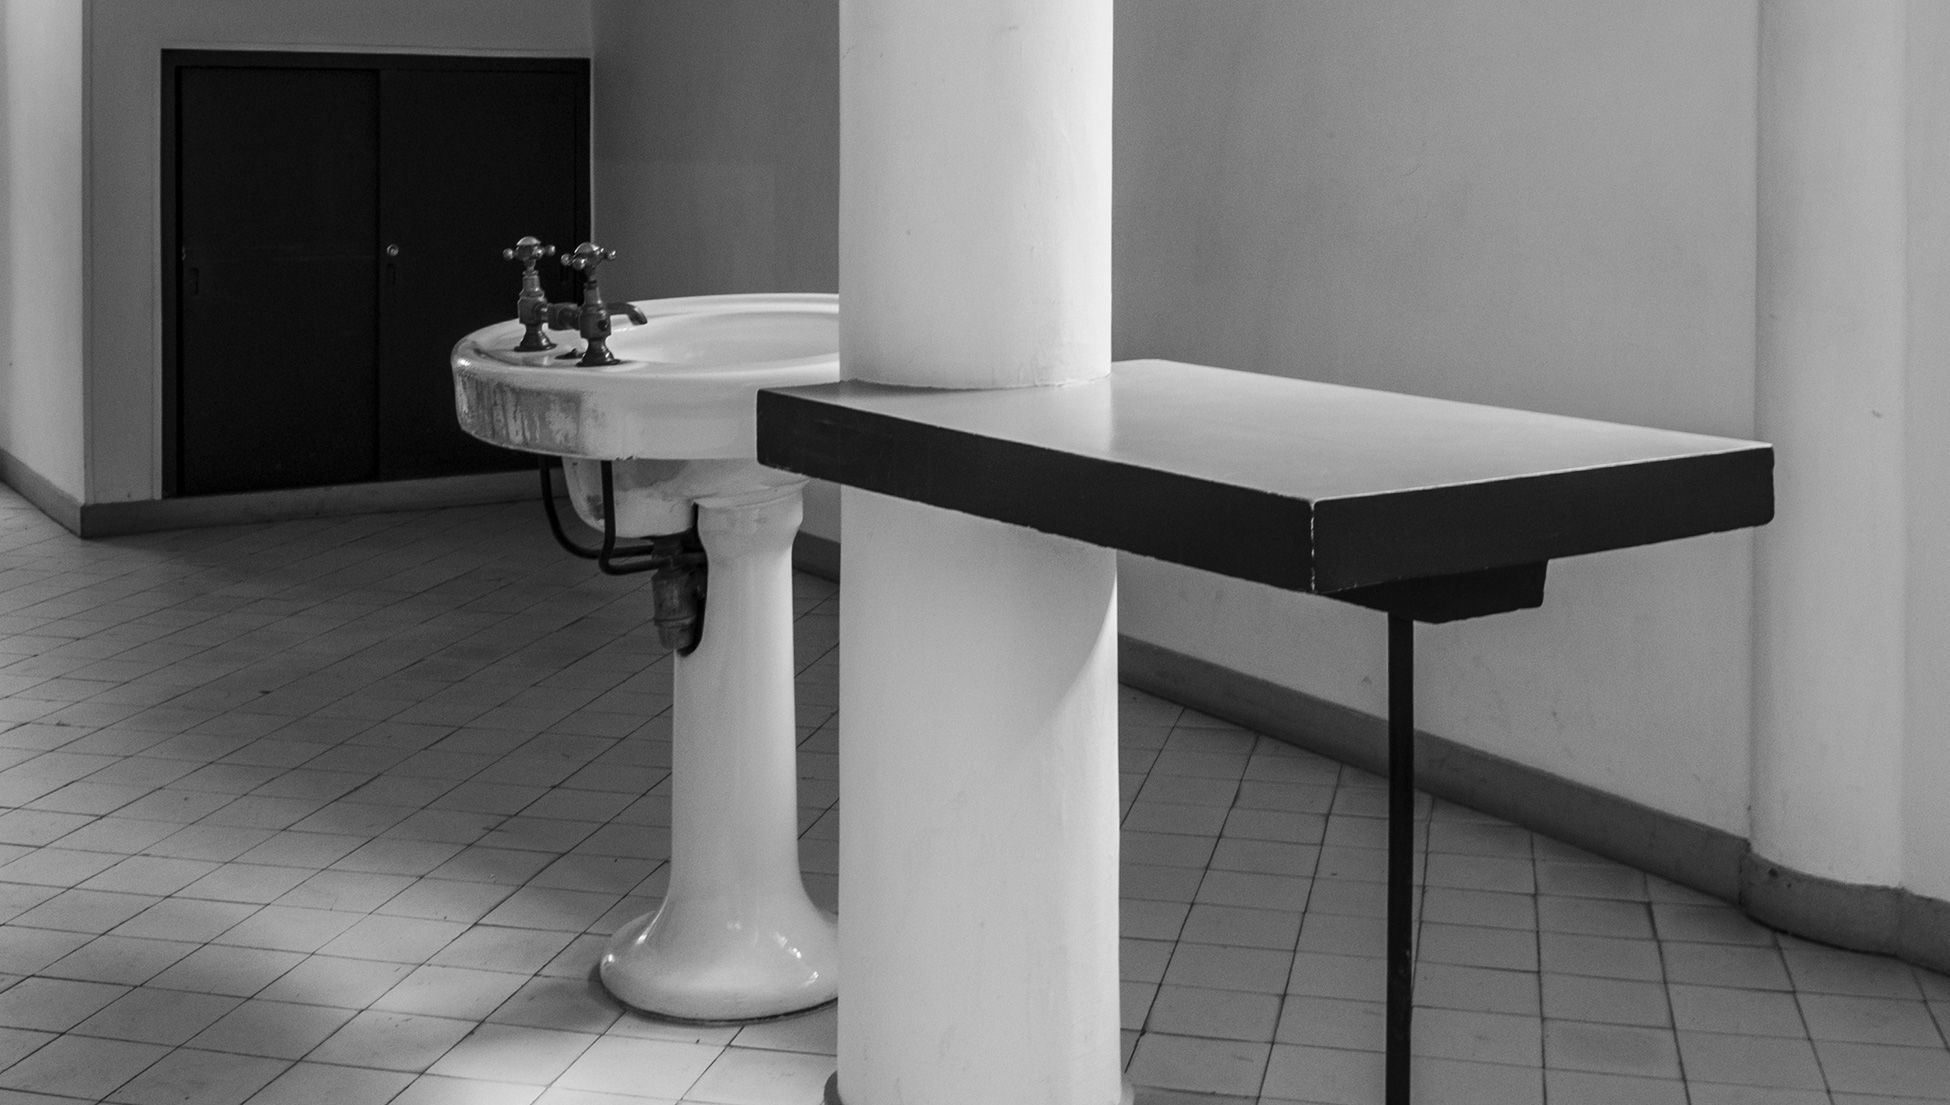 The sink in the hall: how pandemics transform architecture | Psyche